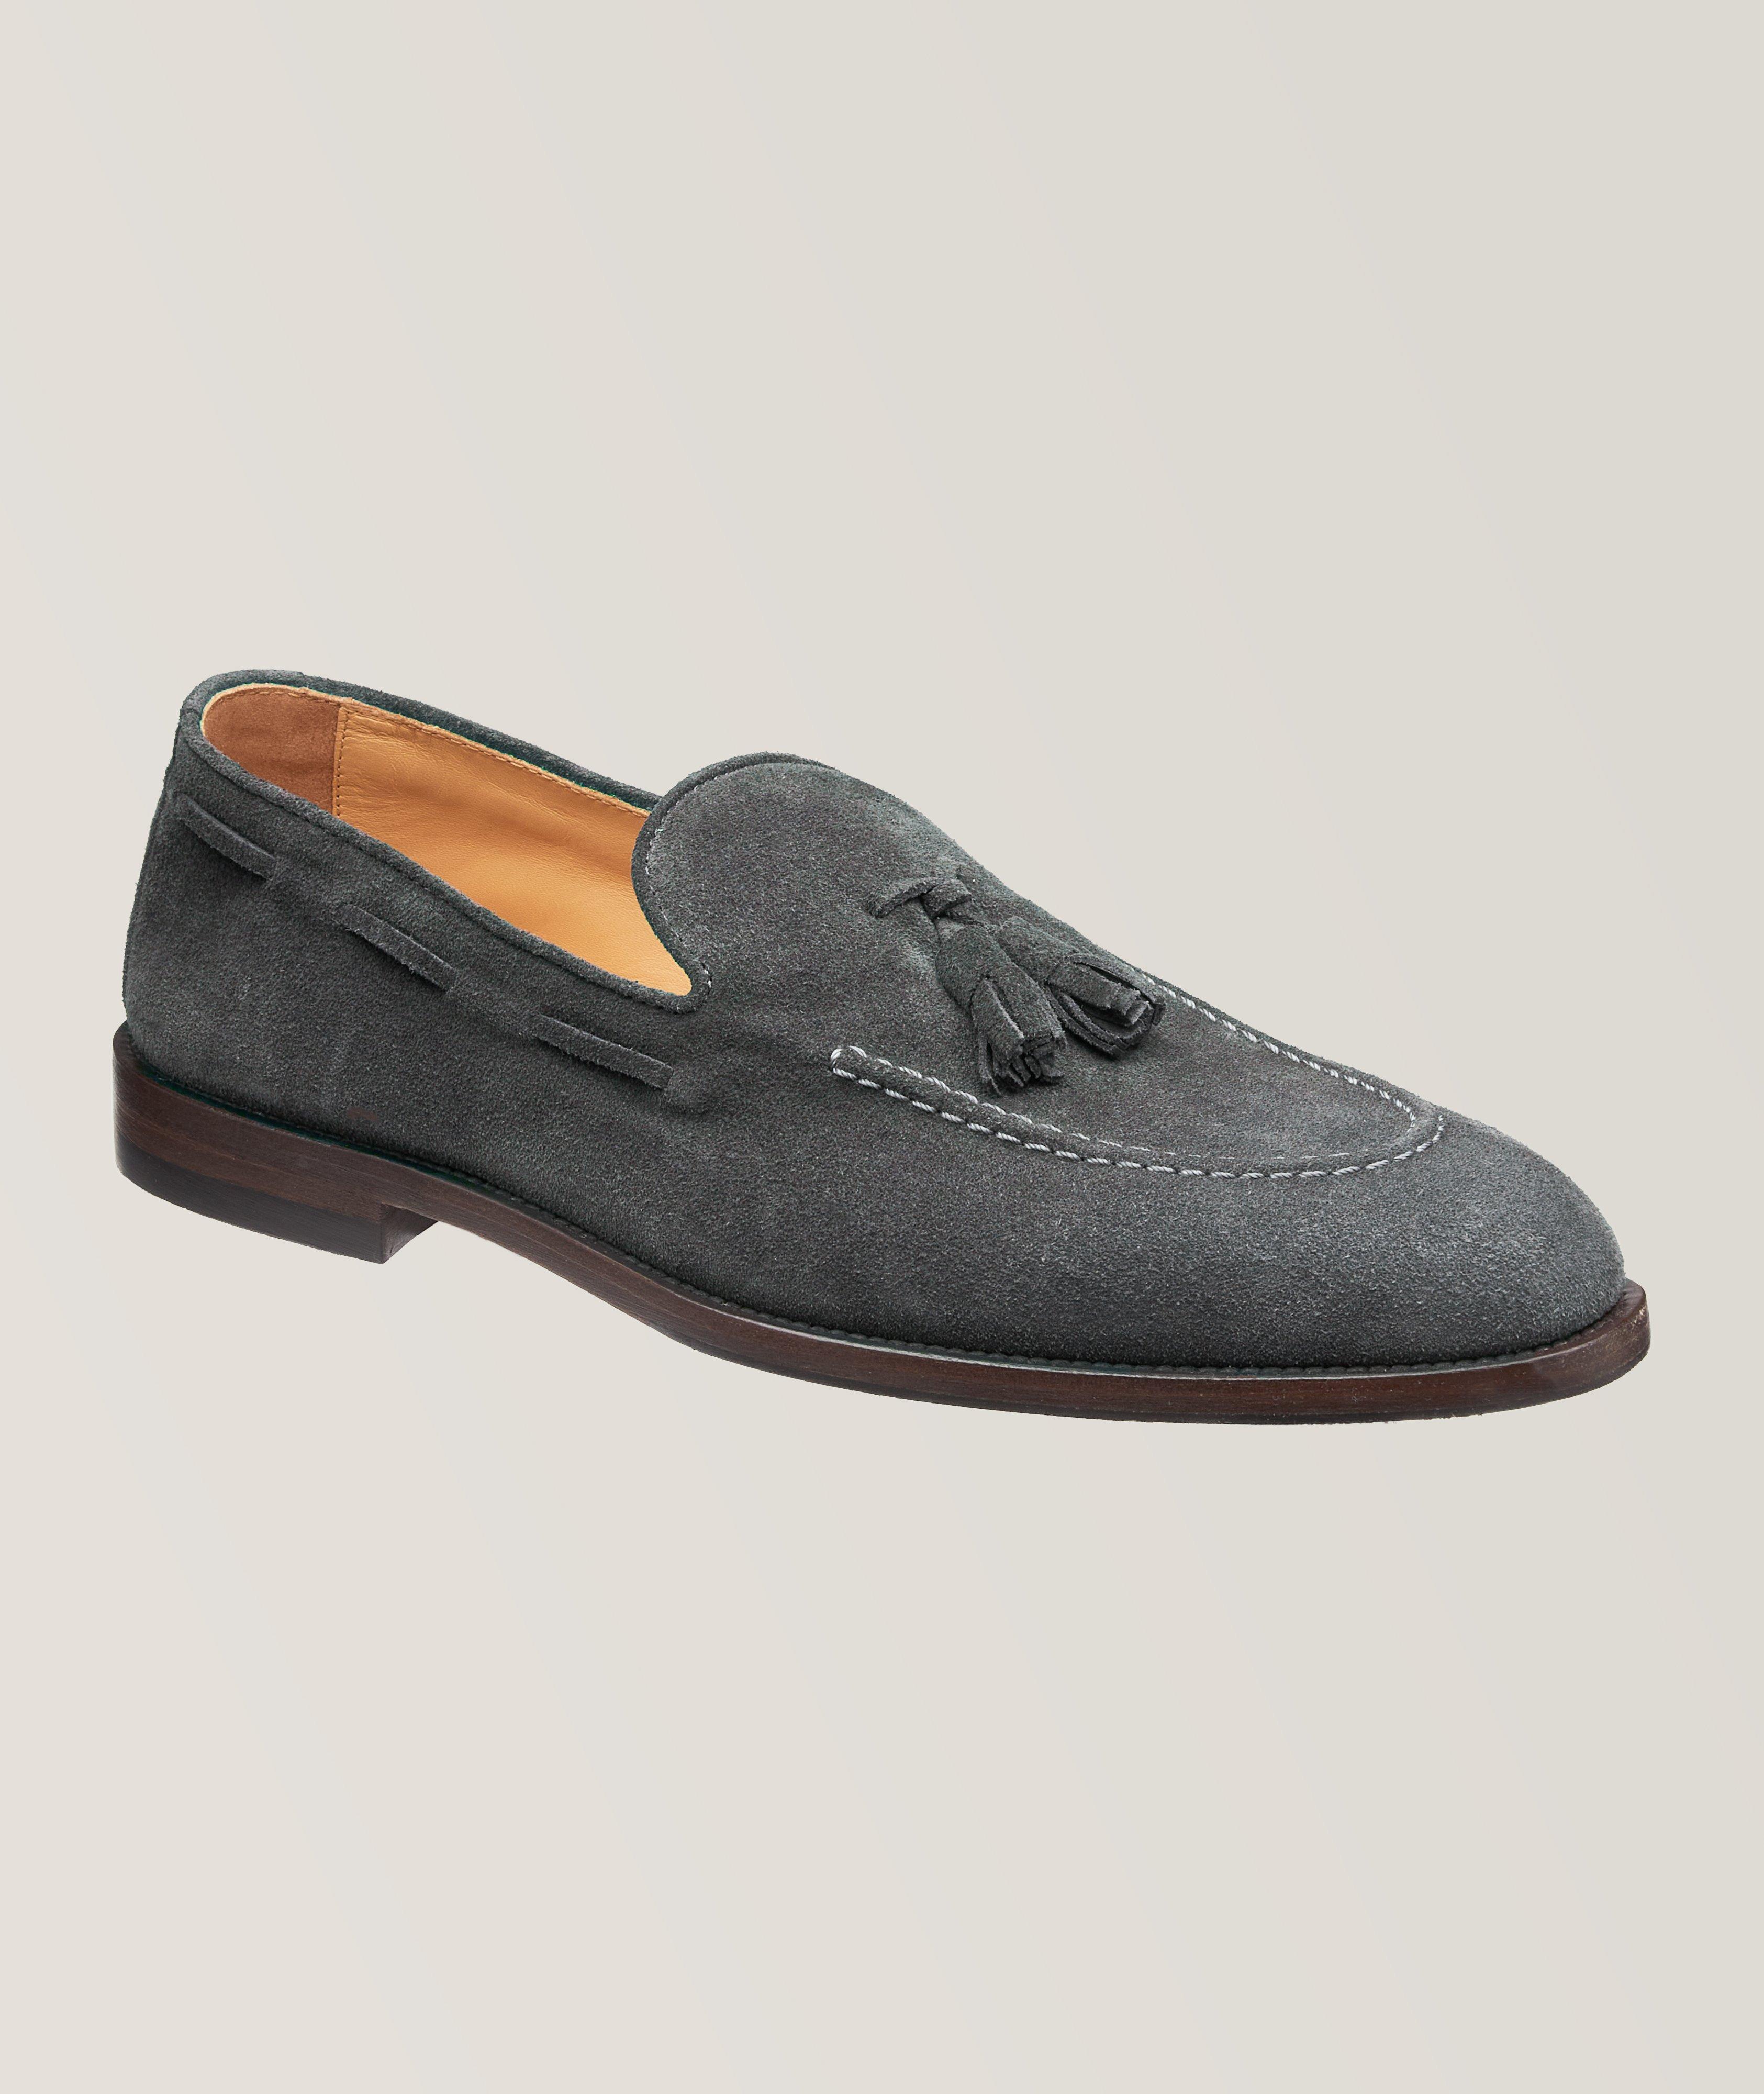 Suede Tassel Loafers image 0